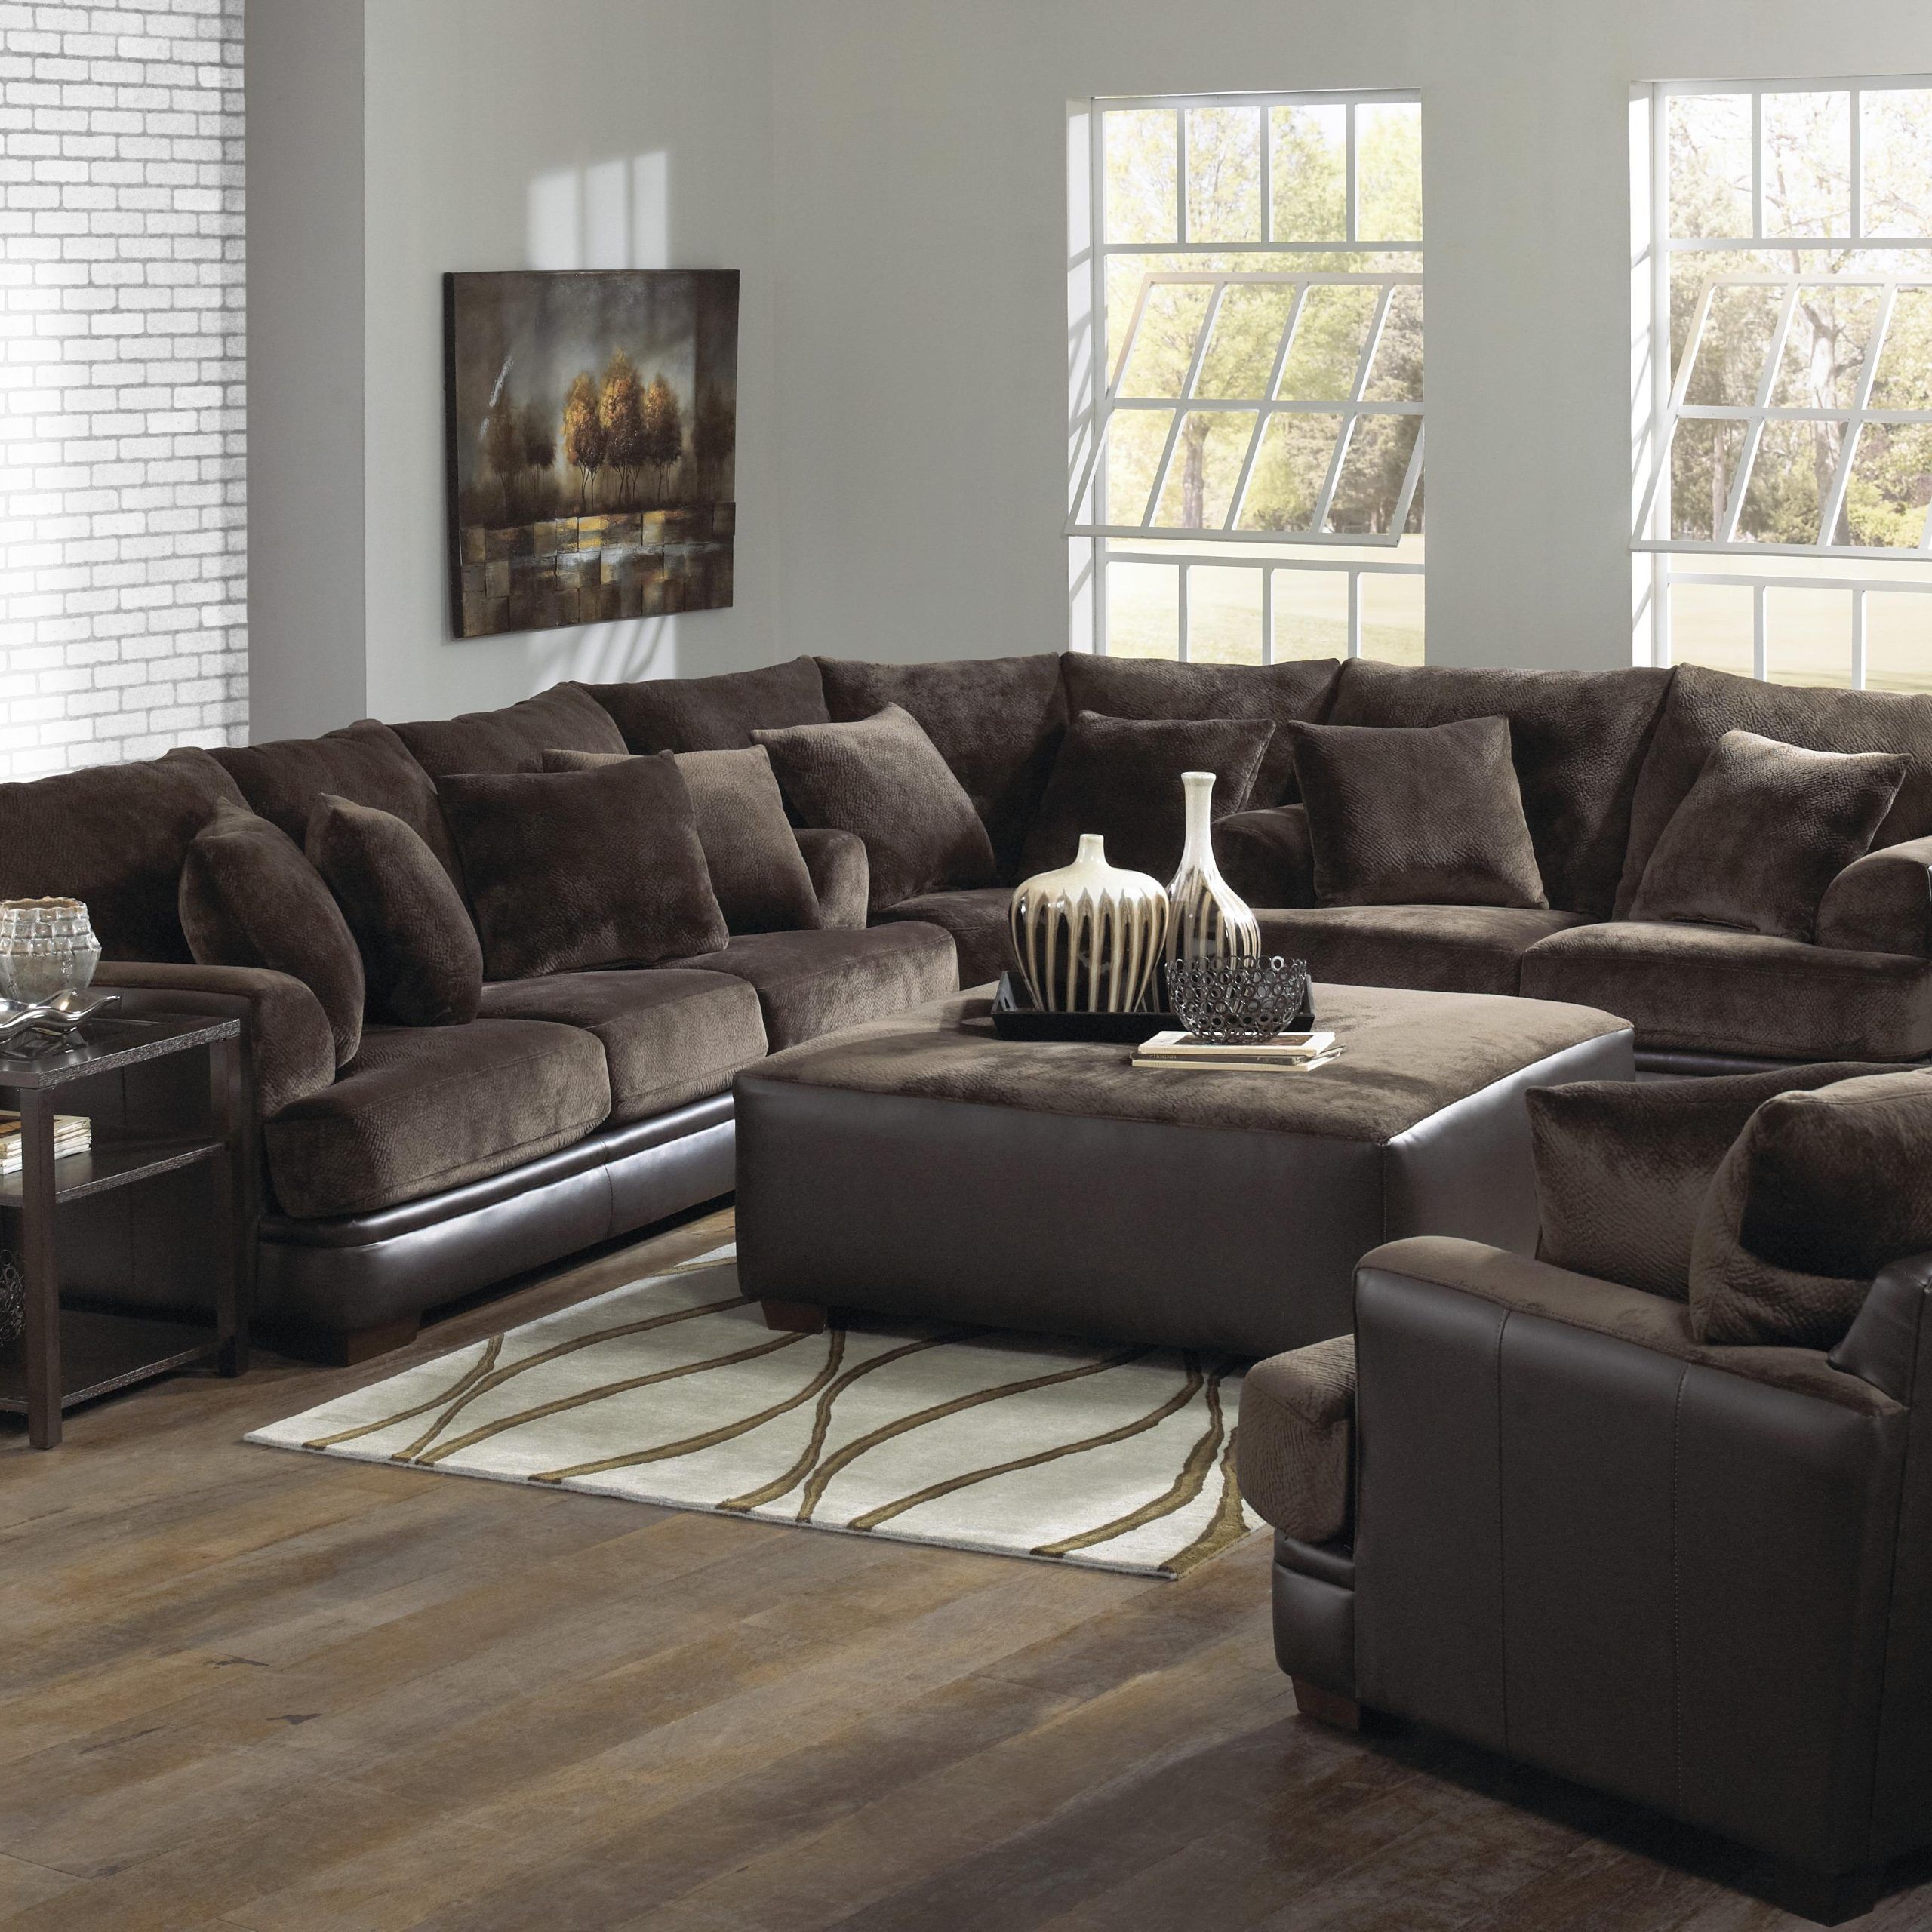 U Shaped Sectional With Chaise Design – Homesfeed Intended For Modern U Shaped Sectional Couch Sets (Gallery 13 of 20)